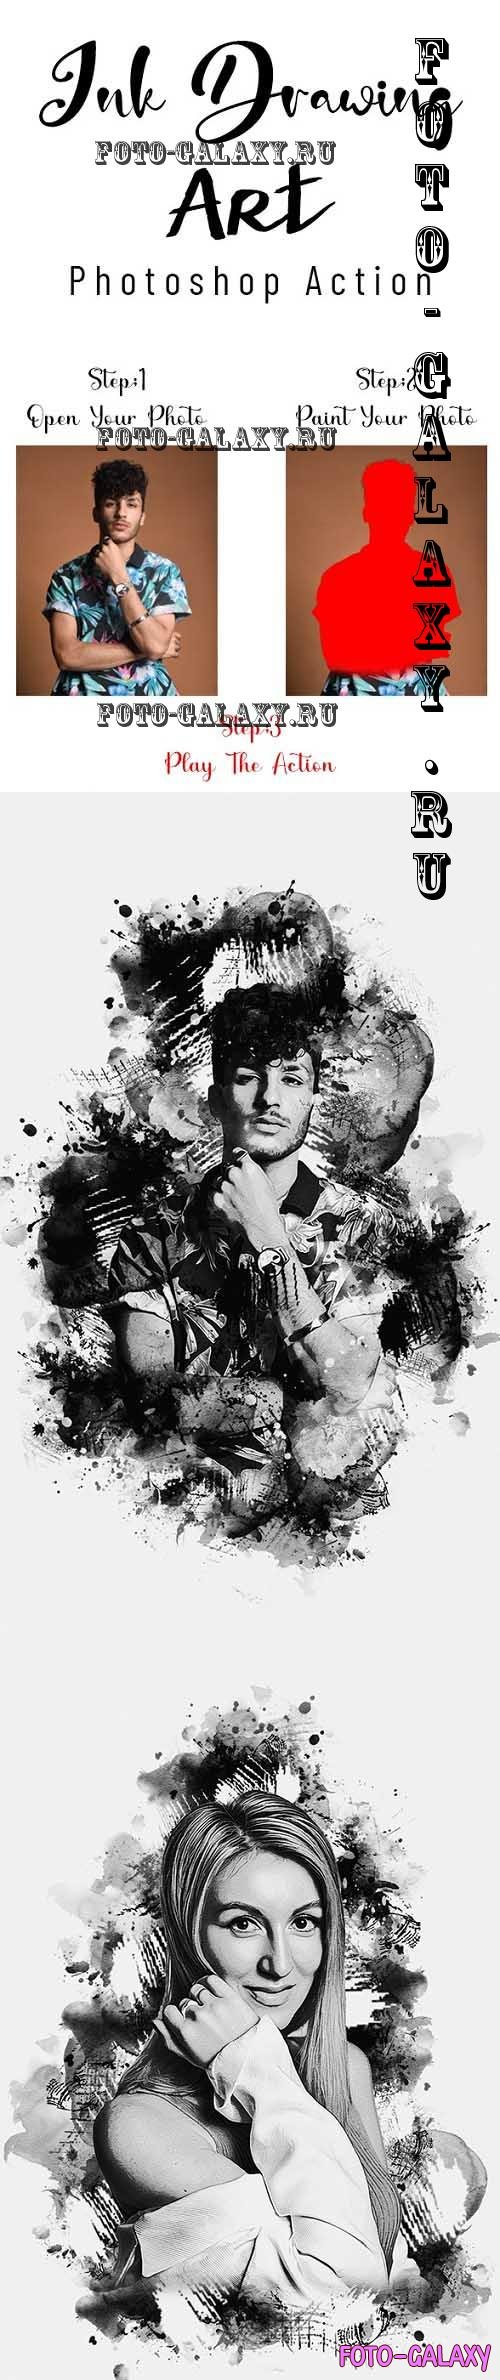 Ink Drawing Art Photoshop Action - 36804671